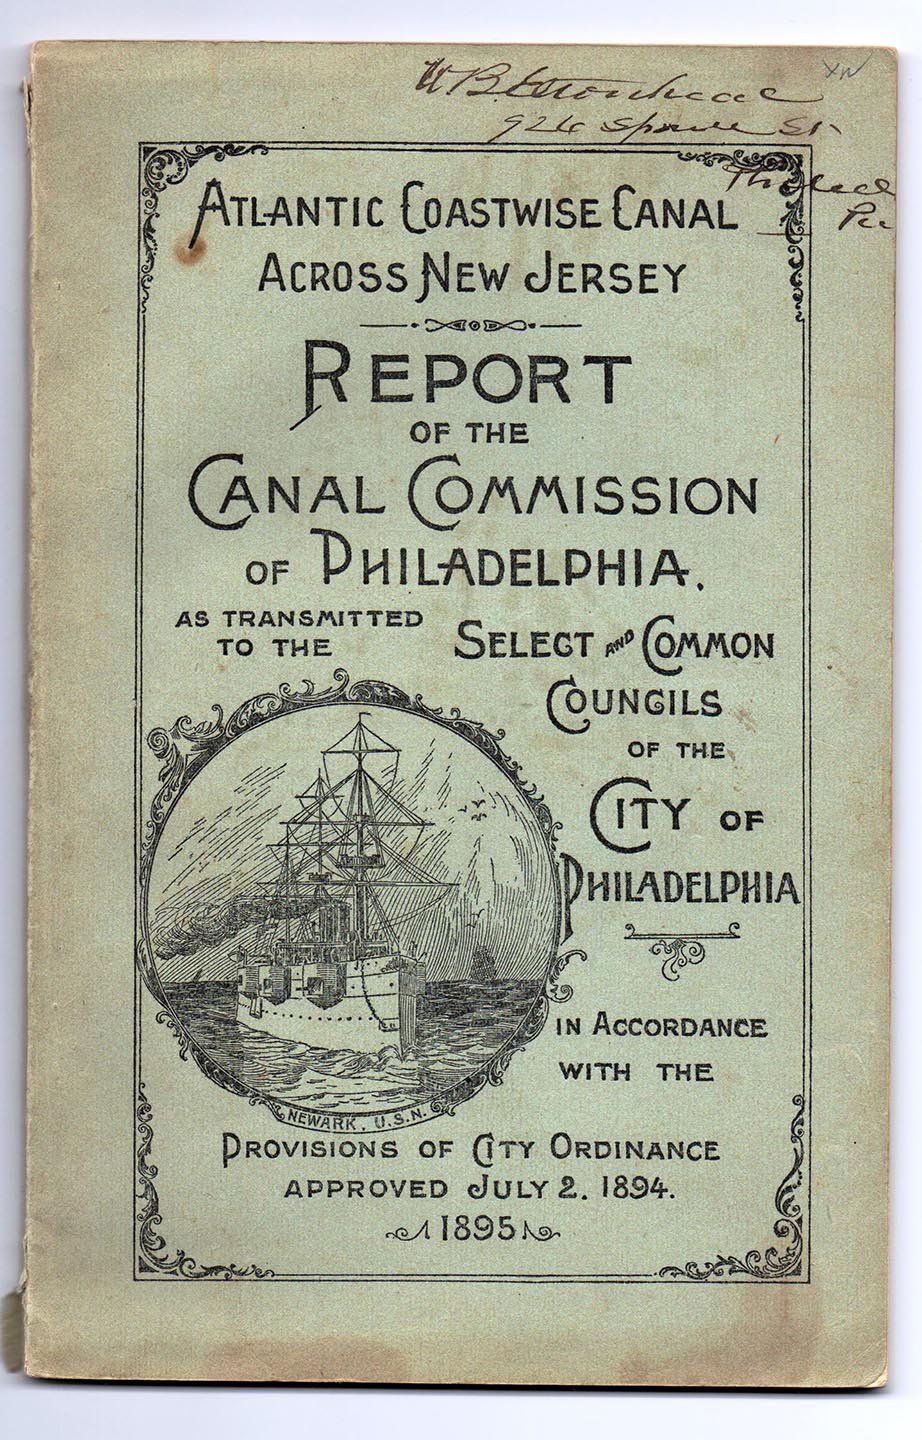 Report of the Canal Commission of Philadelphia as Transmitted to the Select and Common Councils of the City of Philadelphia